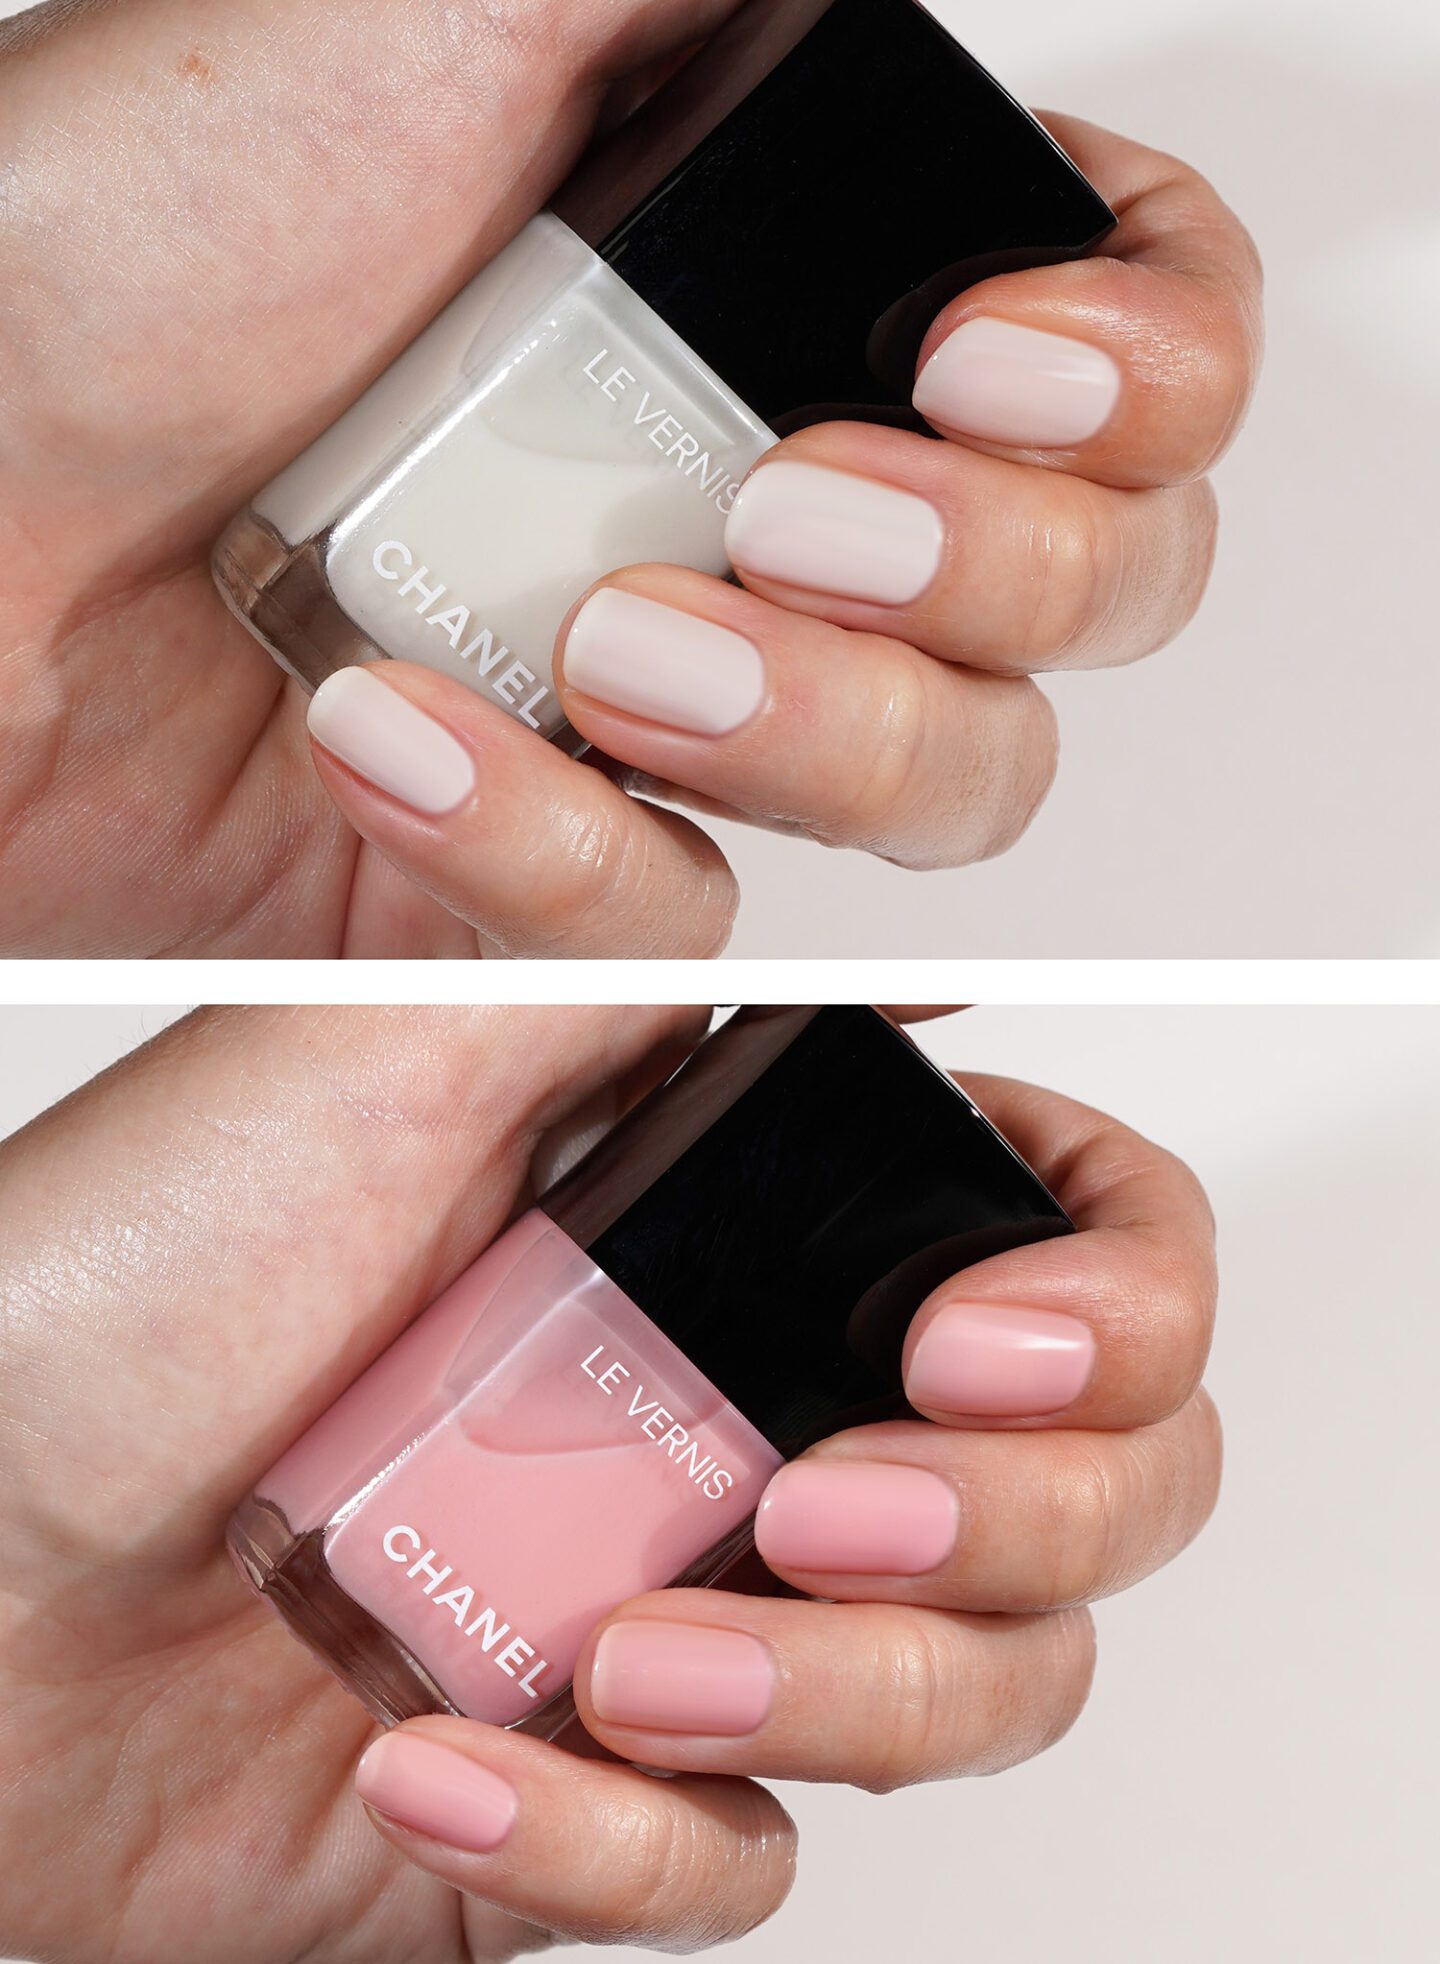 Chanel Le Vernis Glaciale and Skieuse